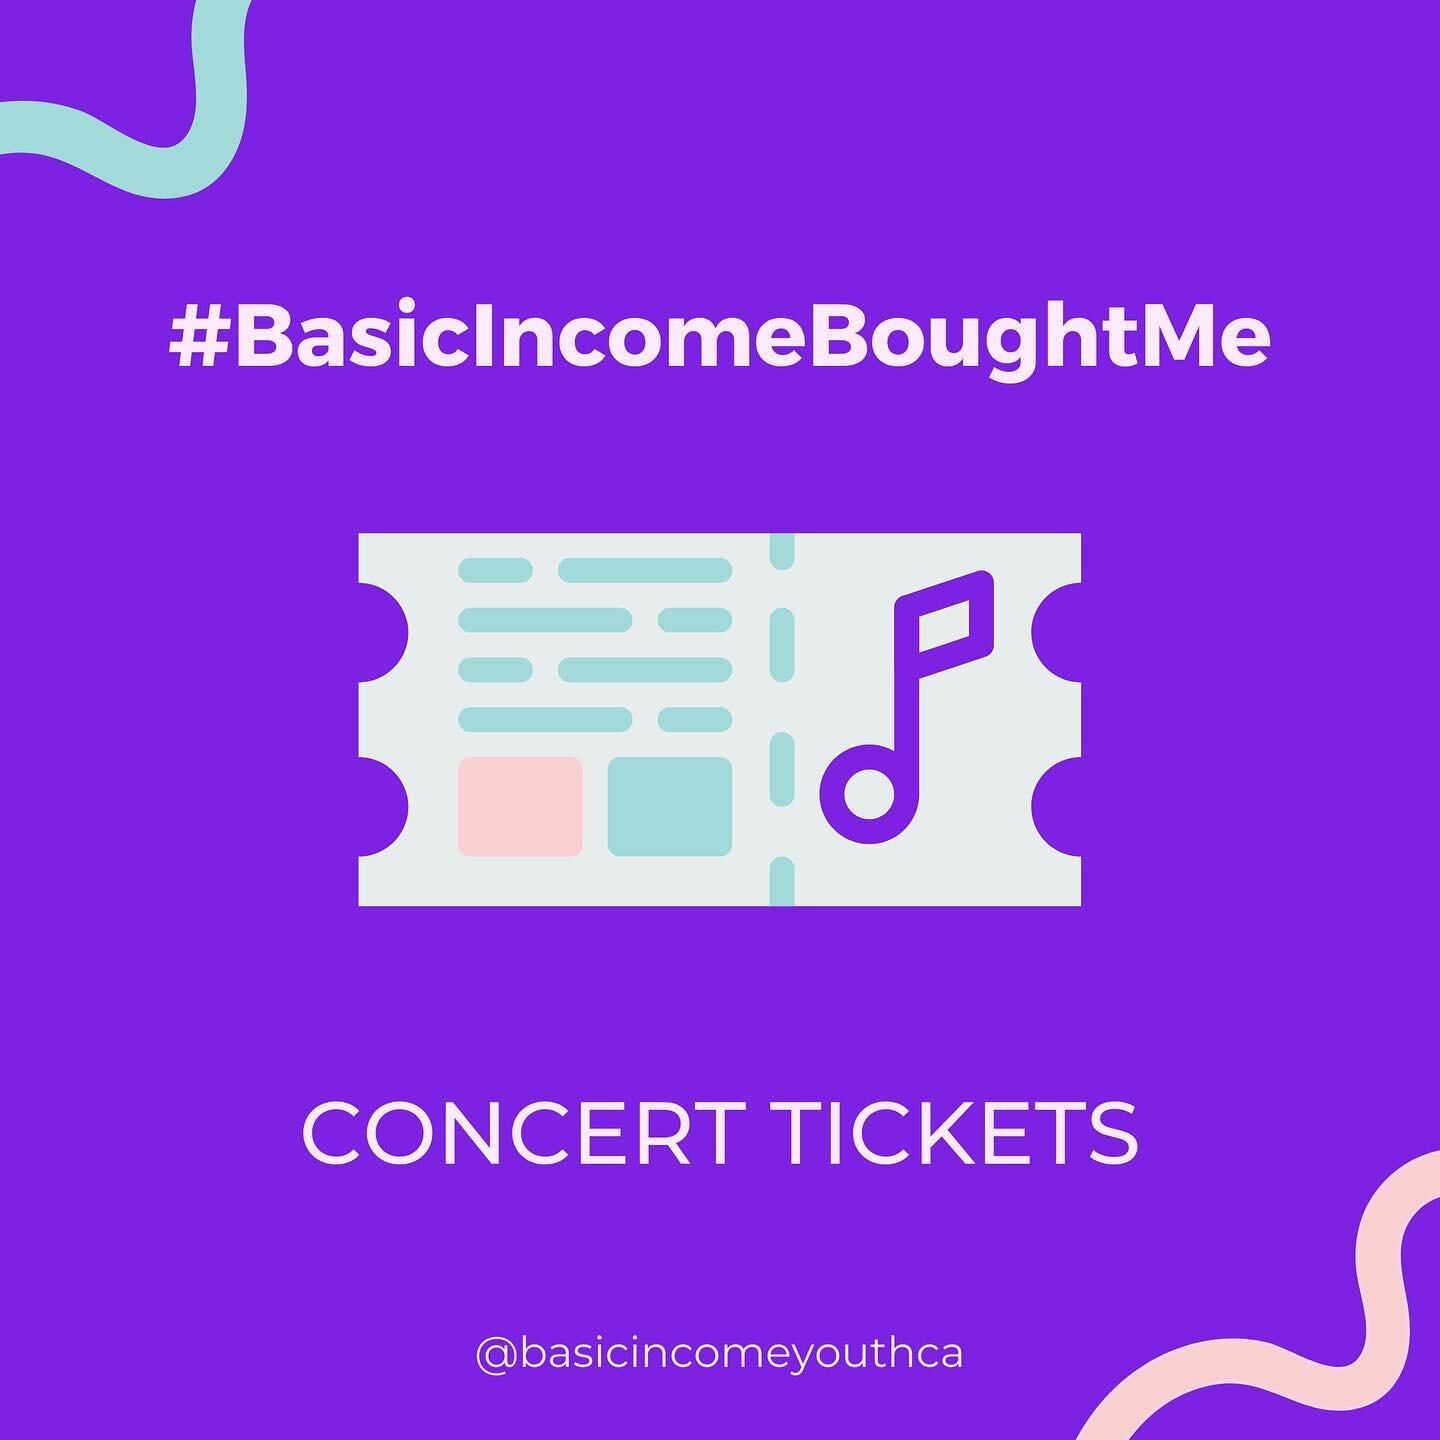 There's something incredibly special about seeing your favourite singer or band perform - but for many, the cost of enjoying live music can be prohibitive. For this OBIP participant, #BasicIncomeBoughtMe concert tickets, and the opportunity to experi